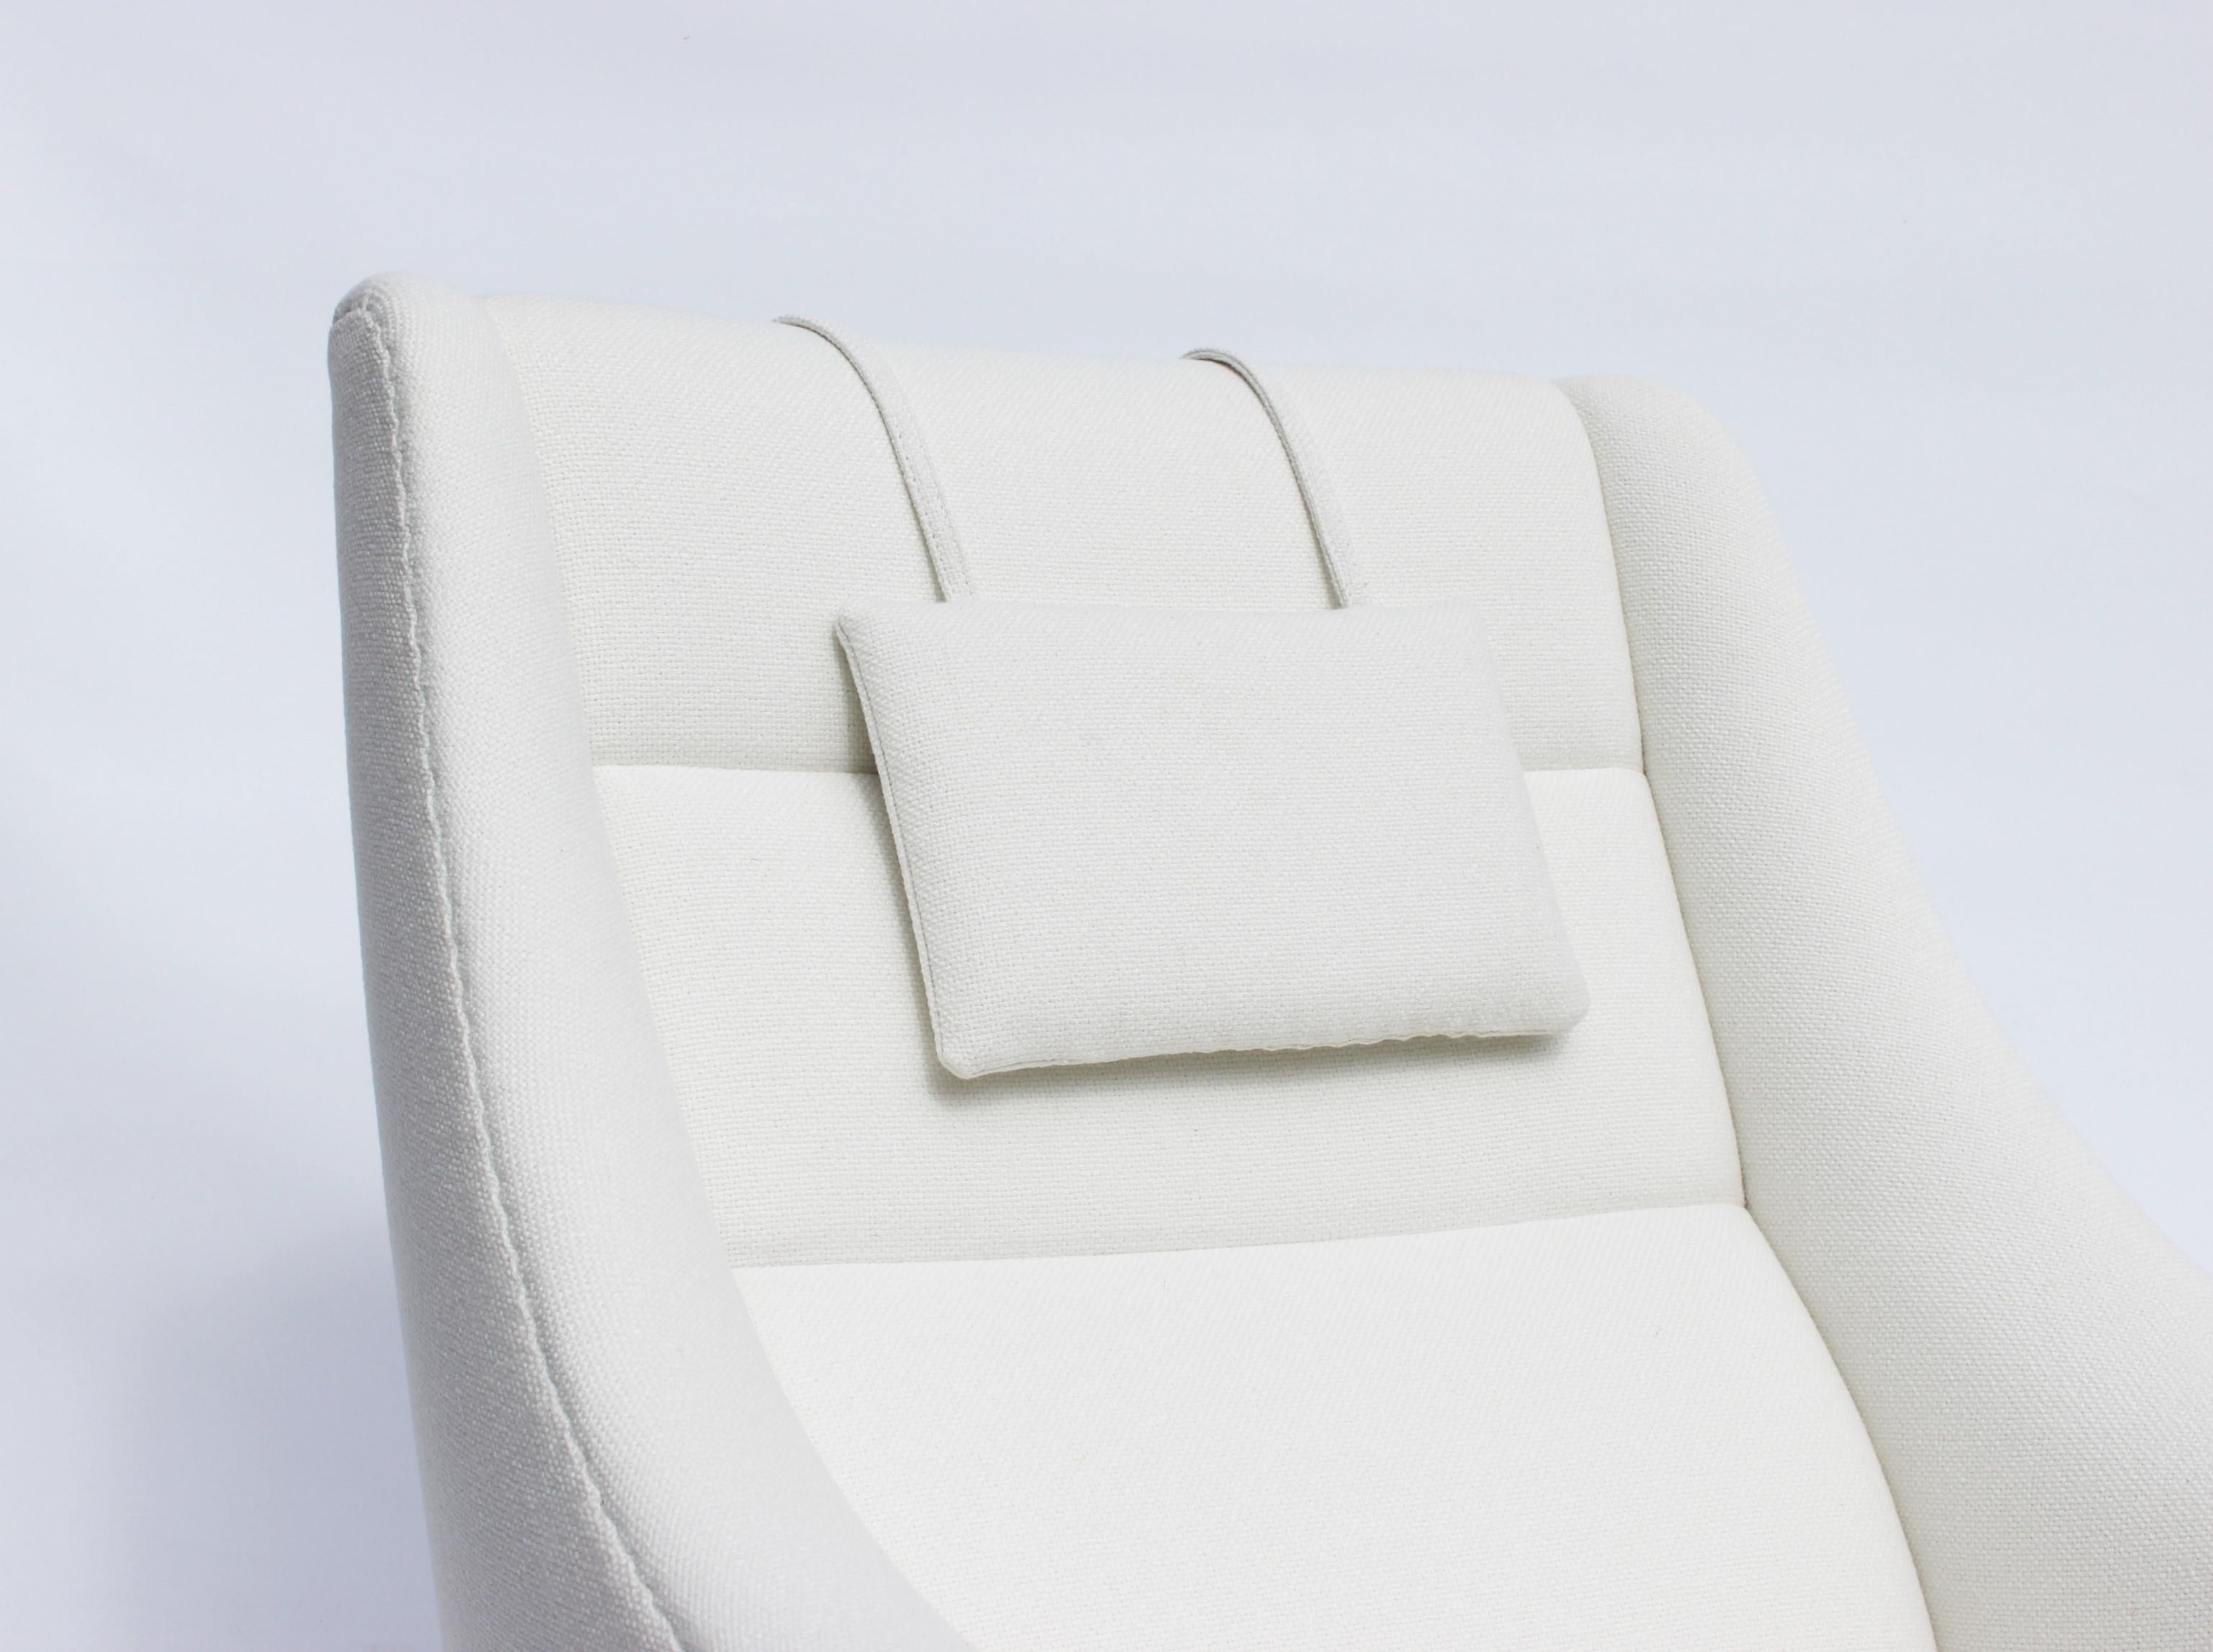 Wool Easy Chair with Tall Back Upholstered in White Fabric, Danish Design, 1960s For Sale